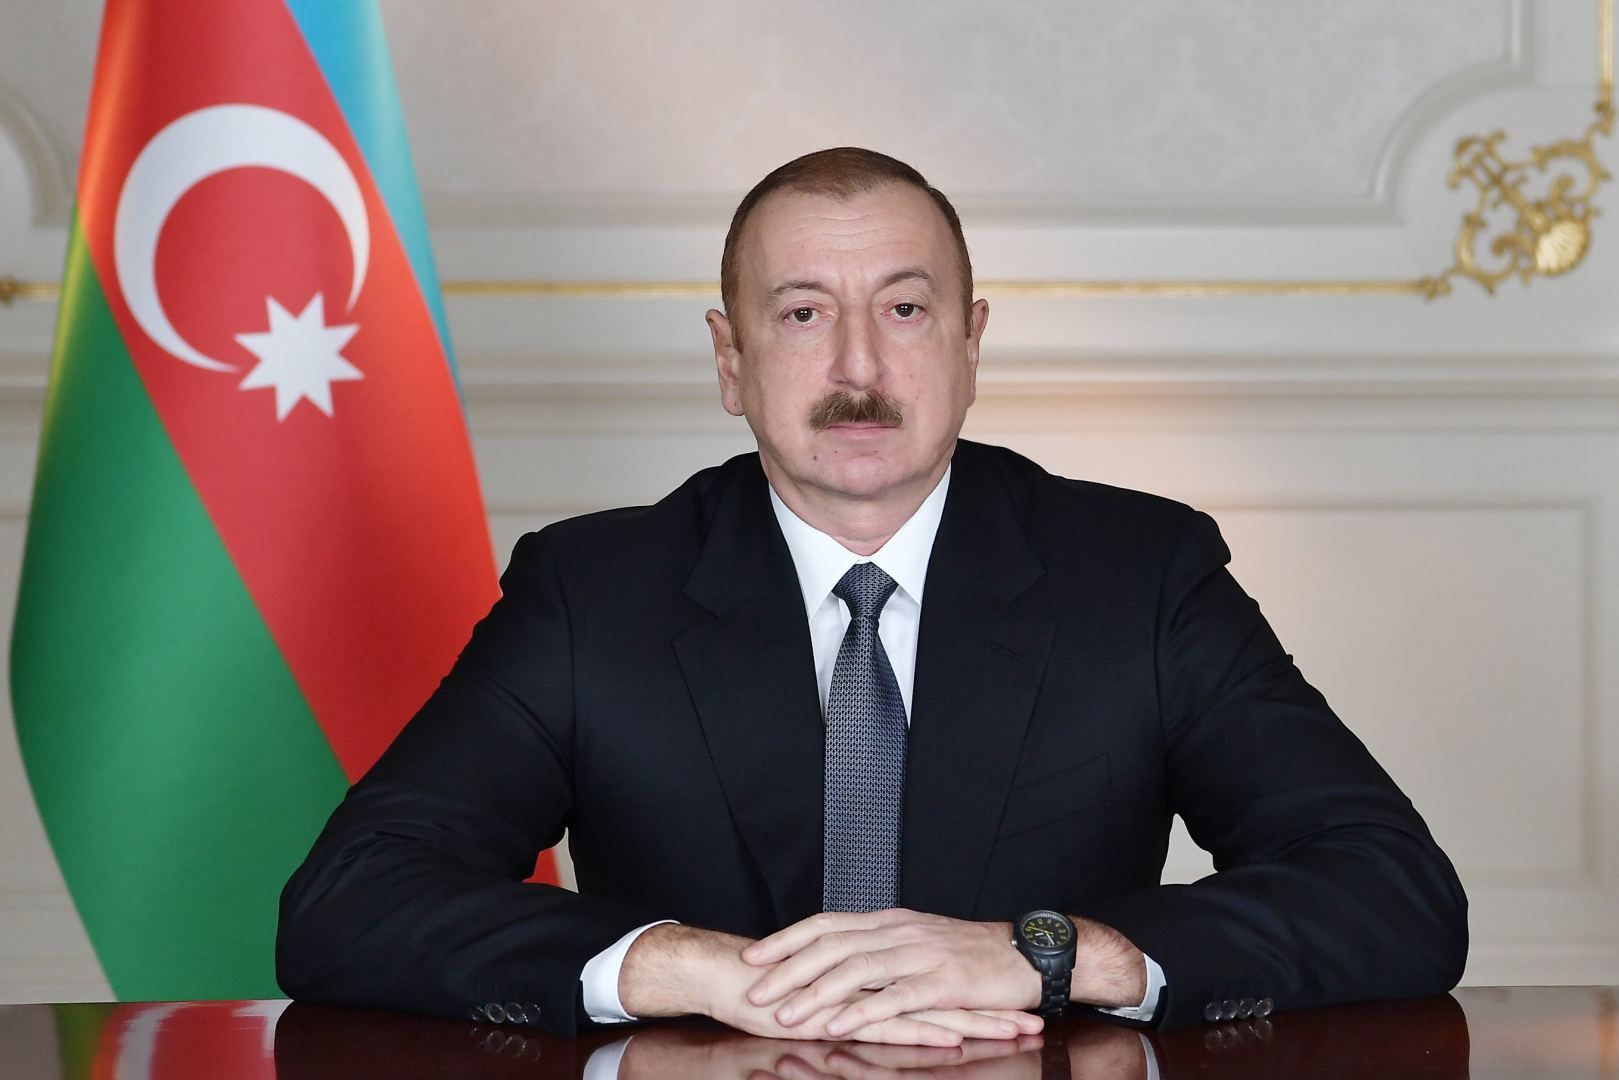 President Ilham Aliyev allocates funds for construction of new road from Azerbaijan to Iran